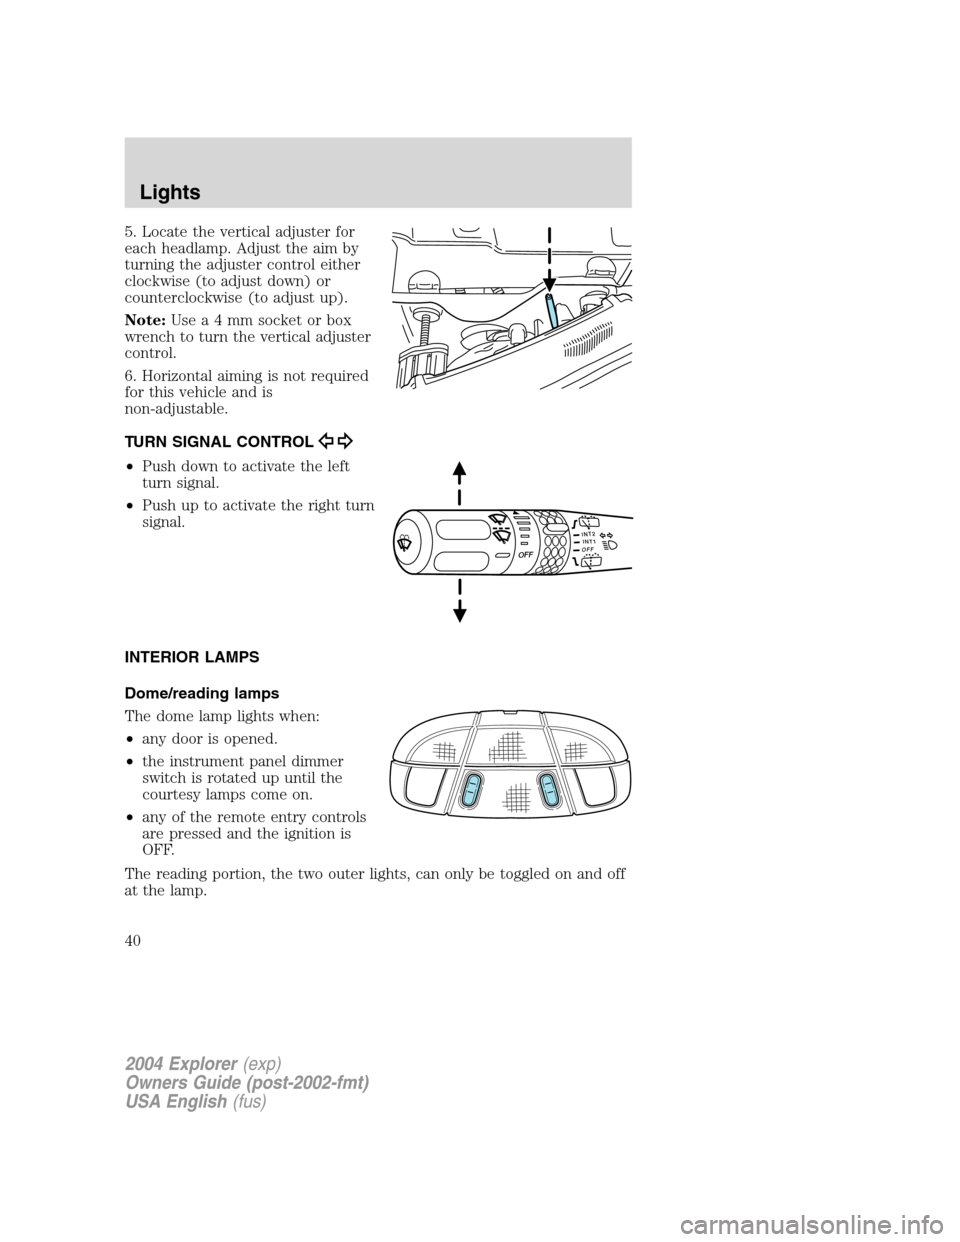 FORD EXPLORER 2004 3.G Owners Guide 5. Locate the vertical adjuster for
each headlamp. Adjust the aim by
turning the adjuster control either
clockwise (to adjust down) or
counterclockwise (to adjust up).
Note:Usea4mmsocket or box
wrench